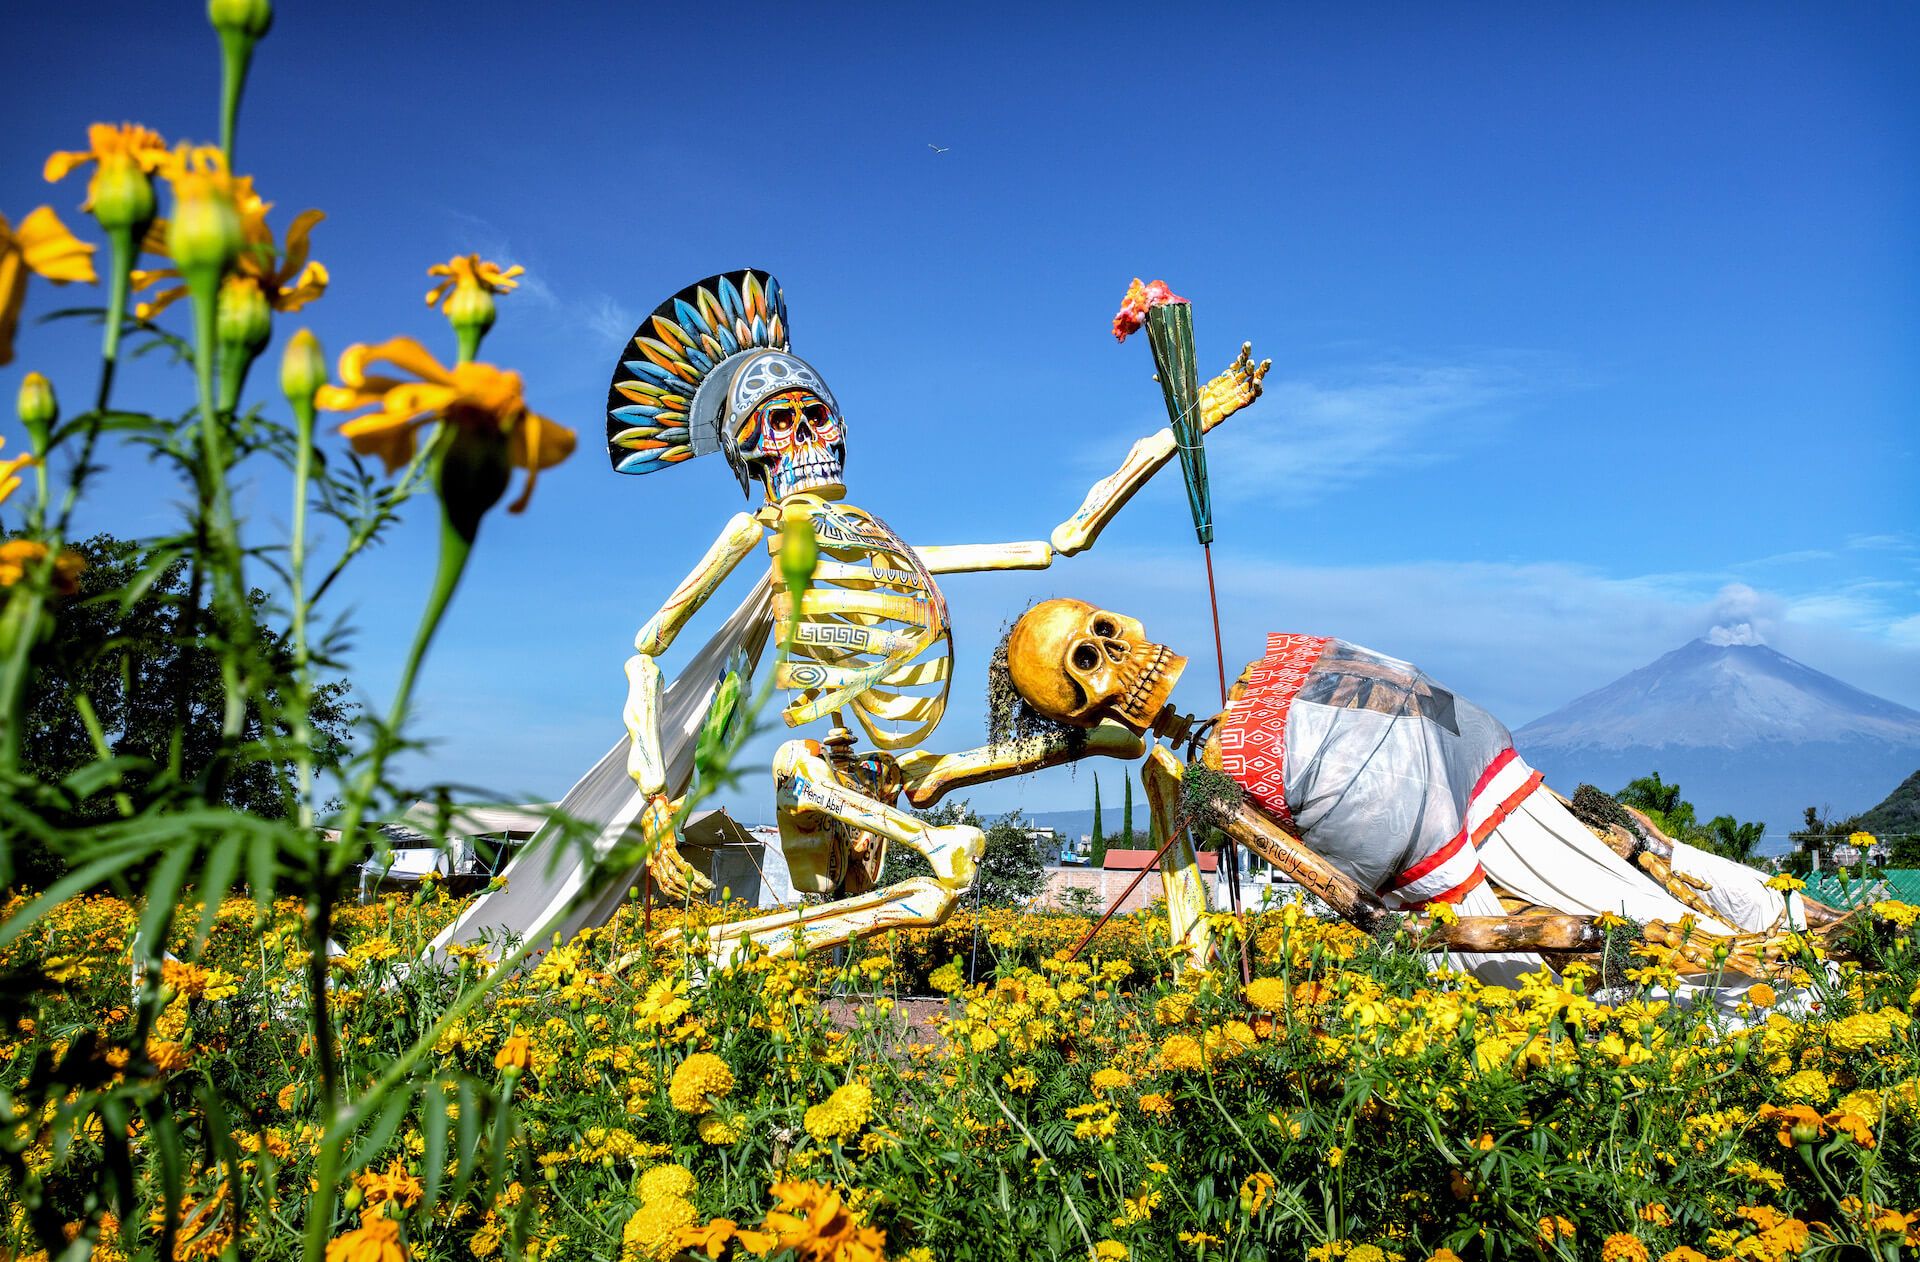 Larger-than-life mannequins of the warrior Popocatépetl and his fiancée Princess Iztacíhuatl in a field of cempasúchil flowers. In the background, the volcano Popocatépetl is erupting. (Photo: Václav Lang)